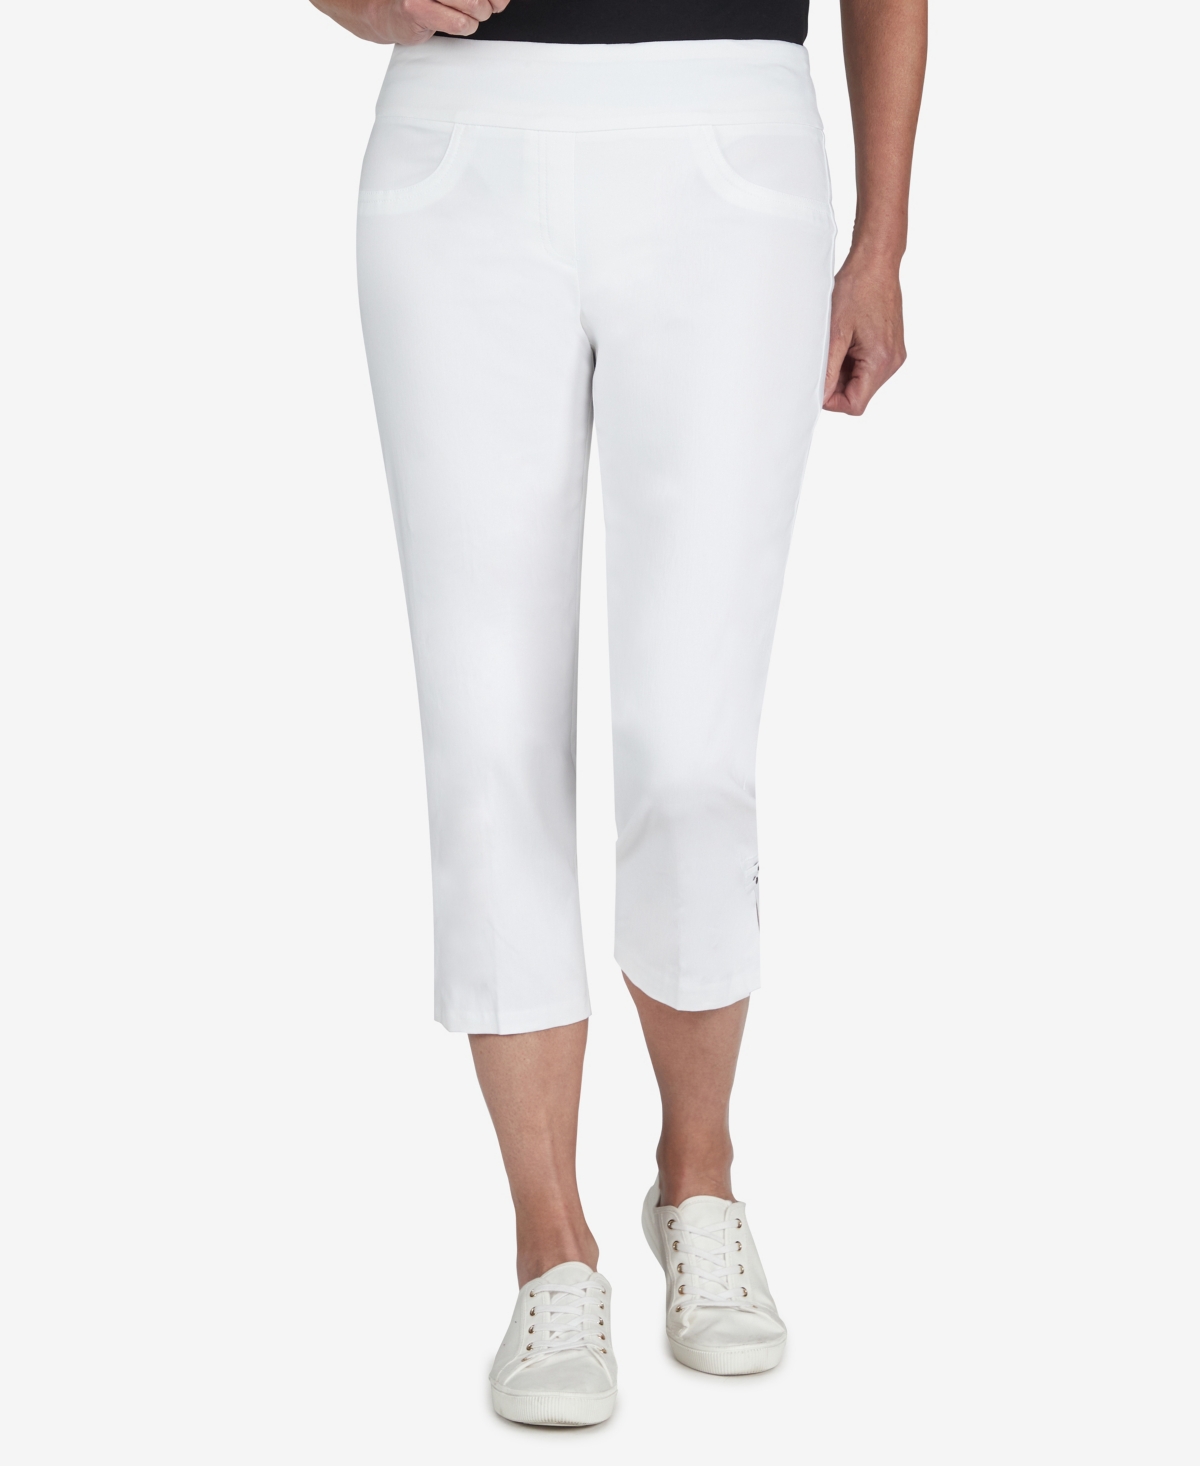 Hearts Of Palm Plus Size Essentials Solid Pull-on Capri Pants With Detailed Split Hem In White